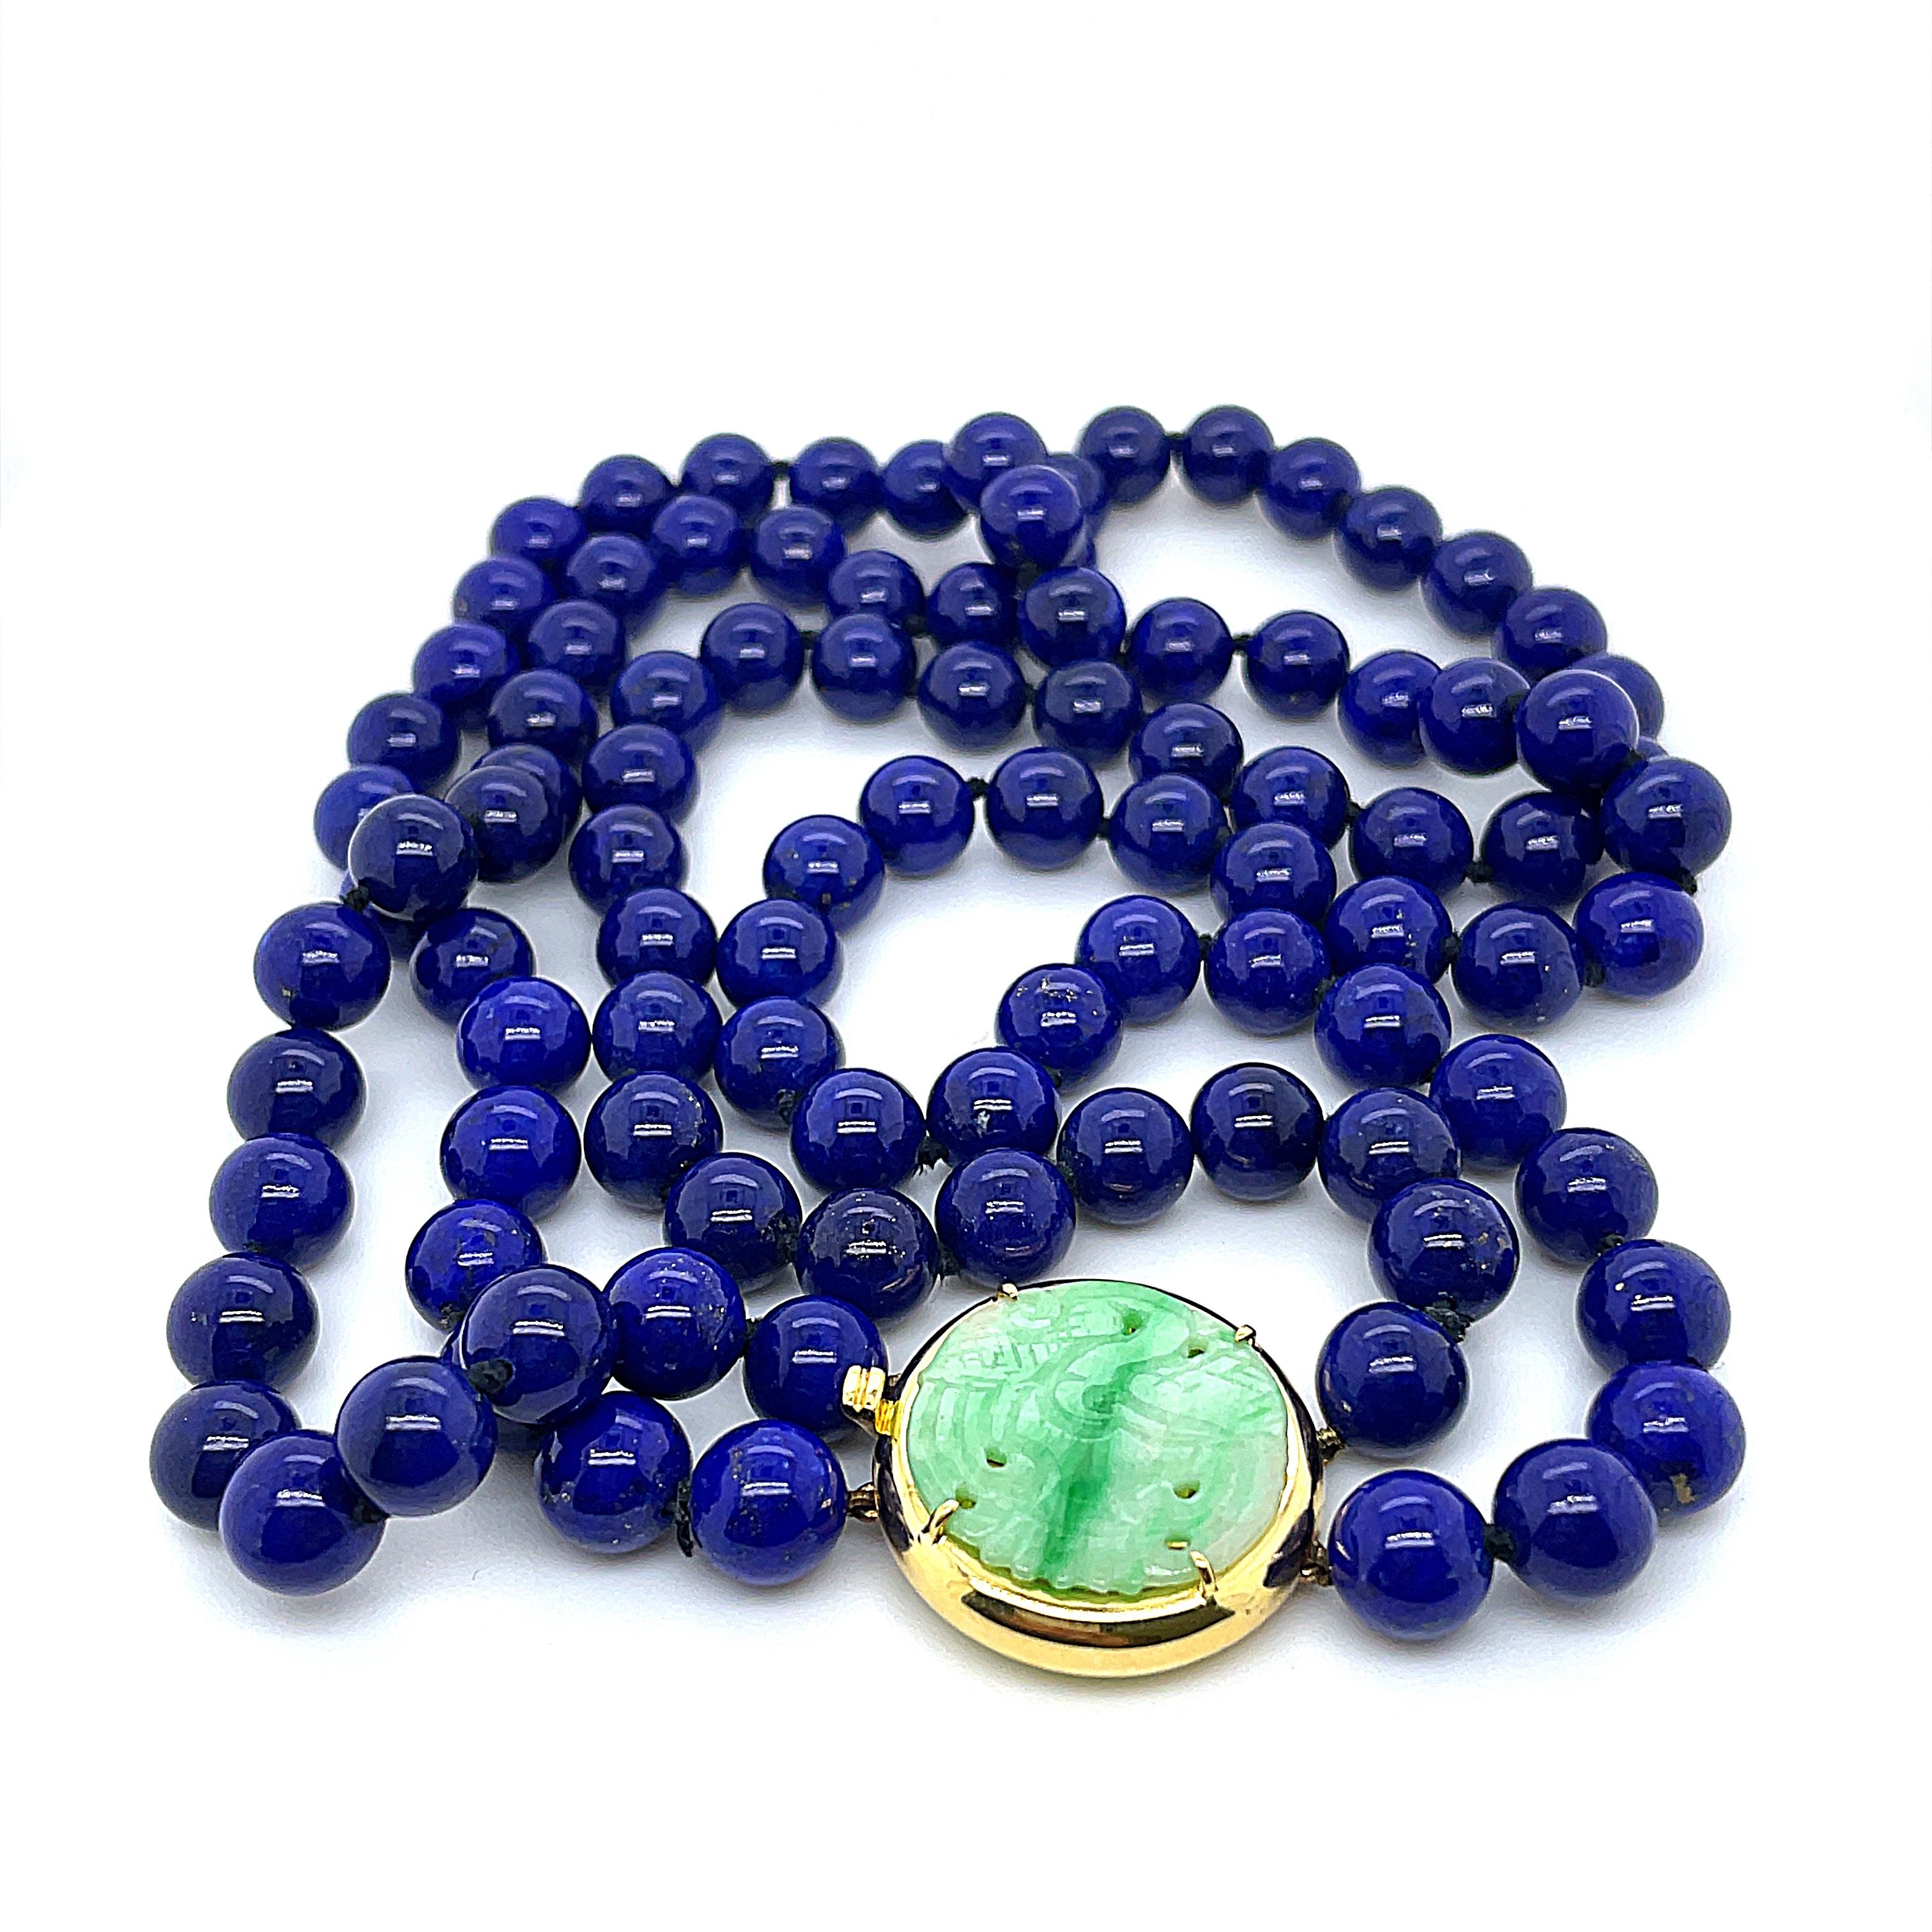 Bead Vintage 1960 Lapiz Necklace Untreated With a Jade Scarab Clasp (18k Yellow Gold) For Sale